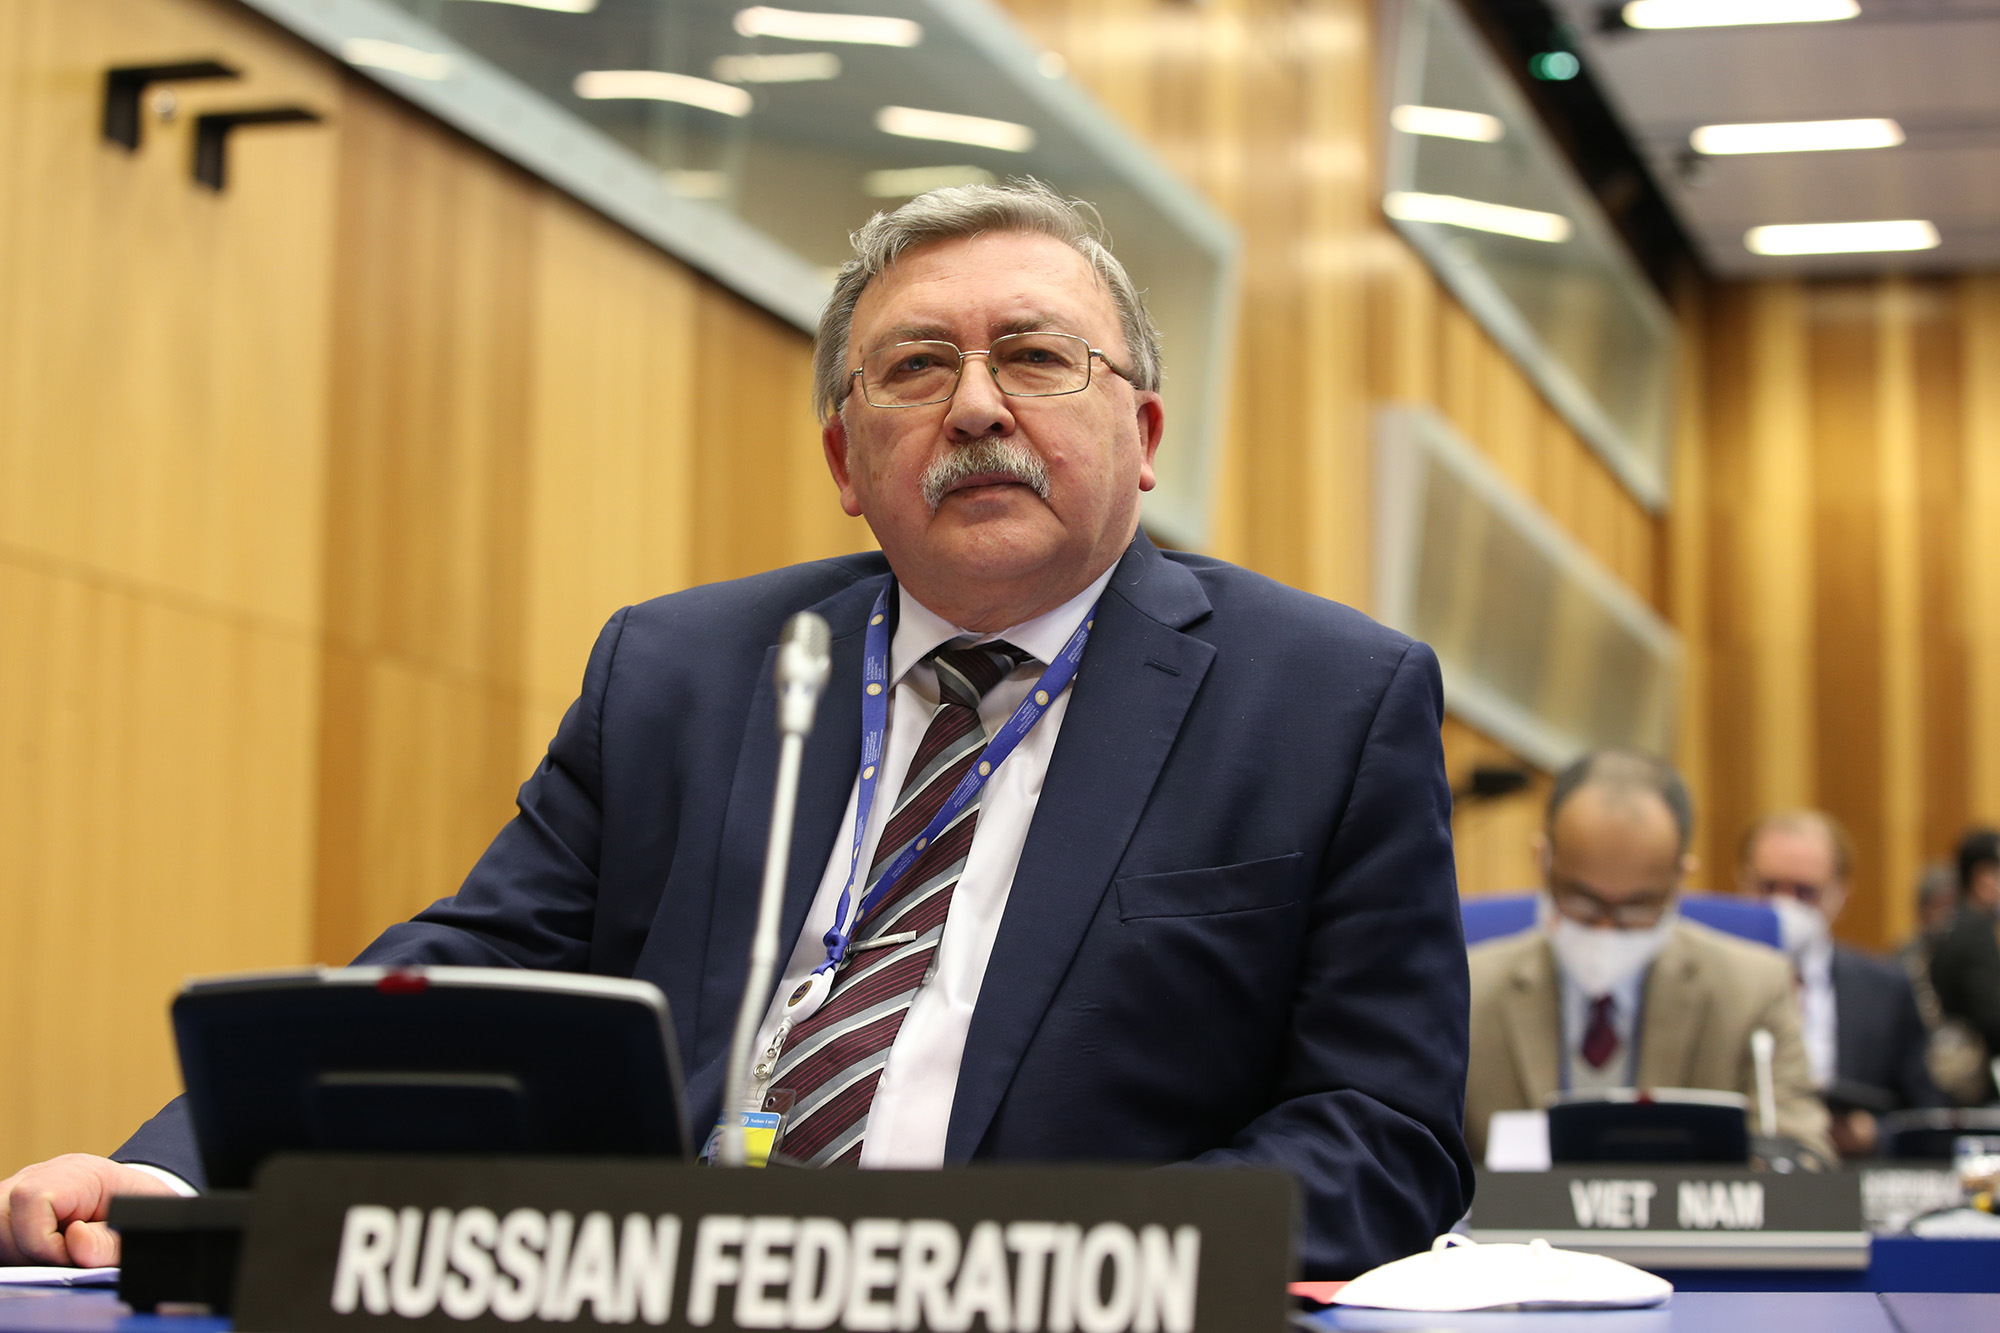 The Governor of the International Atomic Energy Agency (IAEA) of Russia, Mikhail Ulyanov, attends the meeting of the IAEA Board of Governors at the IAEA headquarters in Vienna, Austria, on March 7.